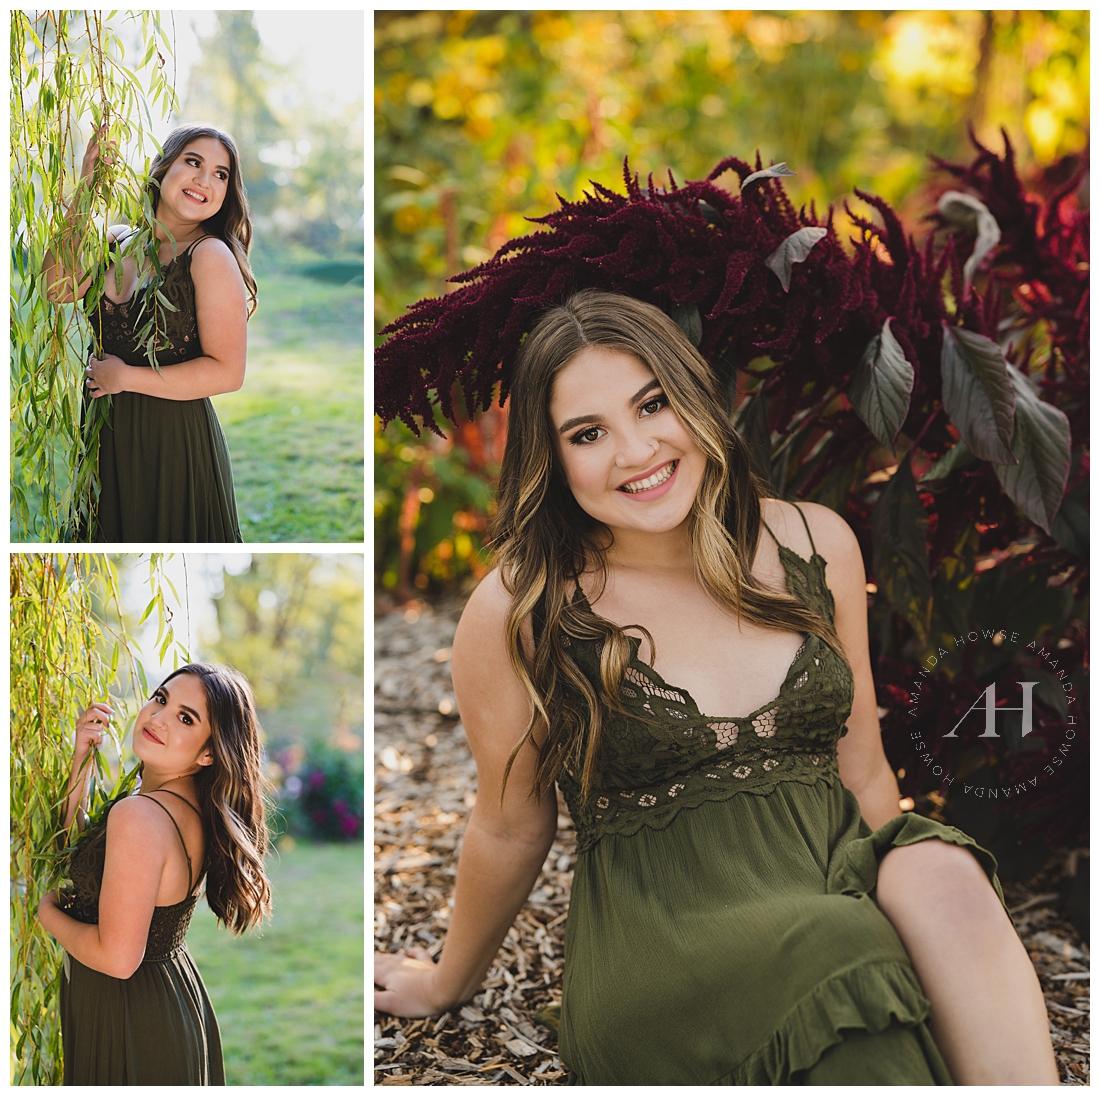 Outdoor Fall Colored Senior Portraits | Cute Green Summer Dress | Photographed by the Best Tacoma, Washington Senior Photographer Amanda Howse Photography